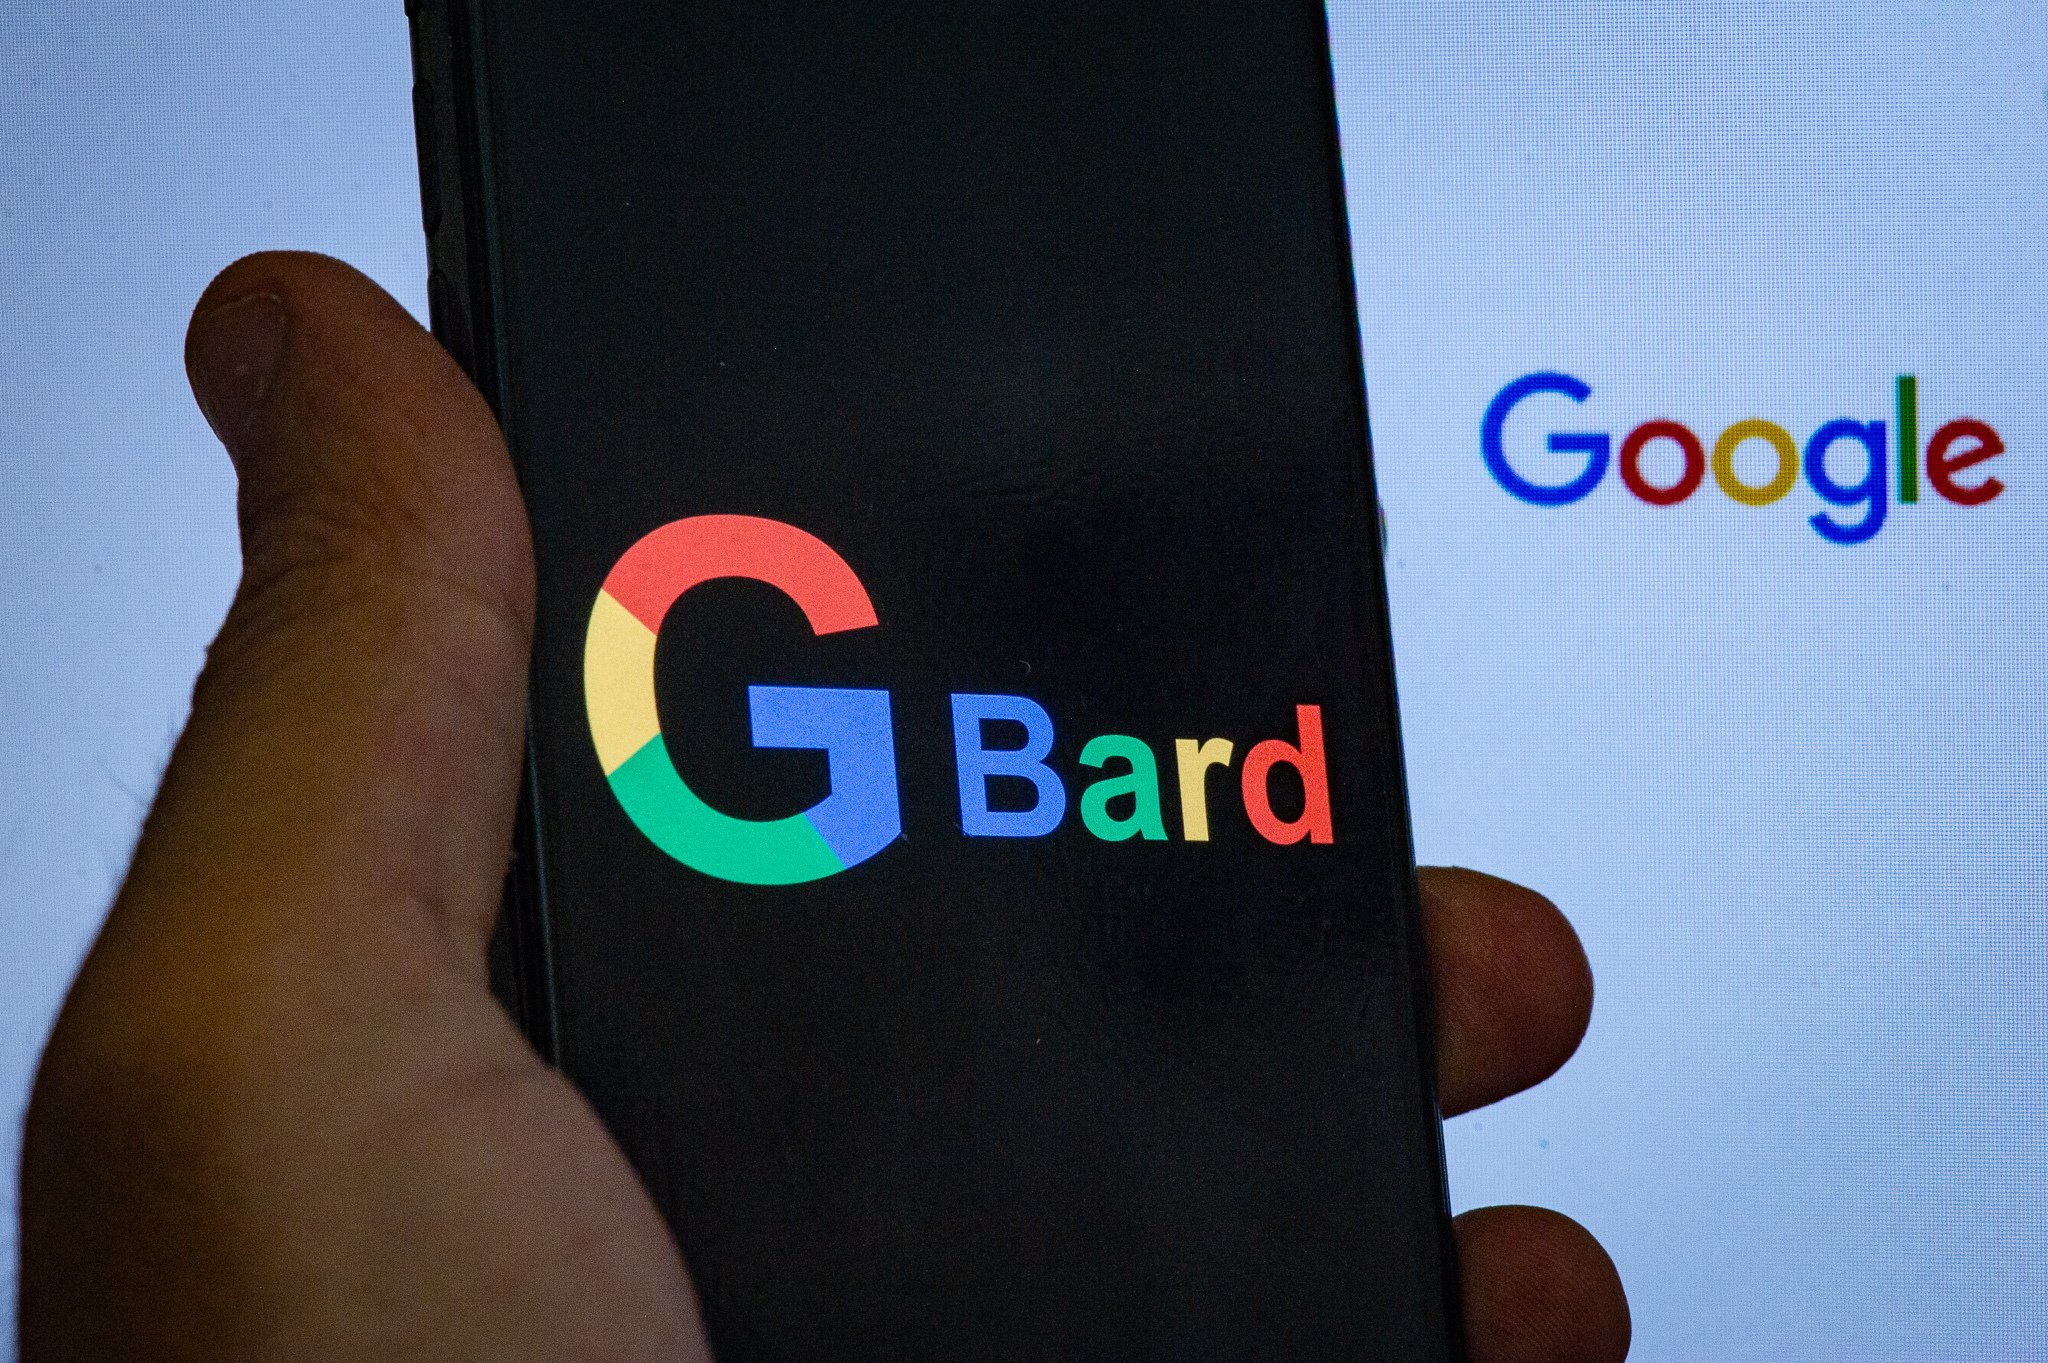 A Google logo displayed on a personal computer and a Bard logo displayed on a mobile phone 